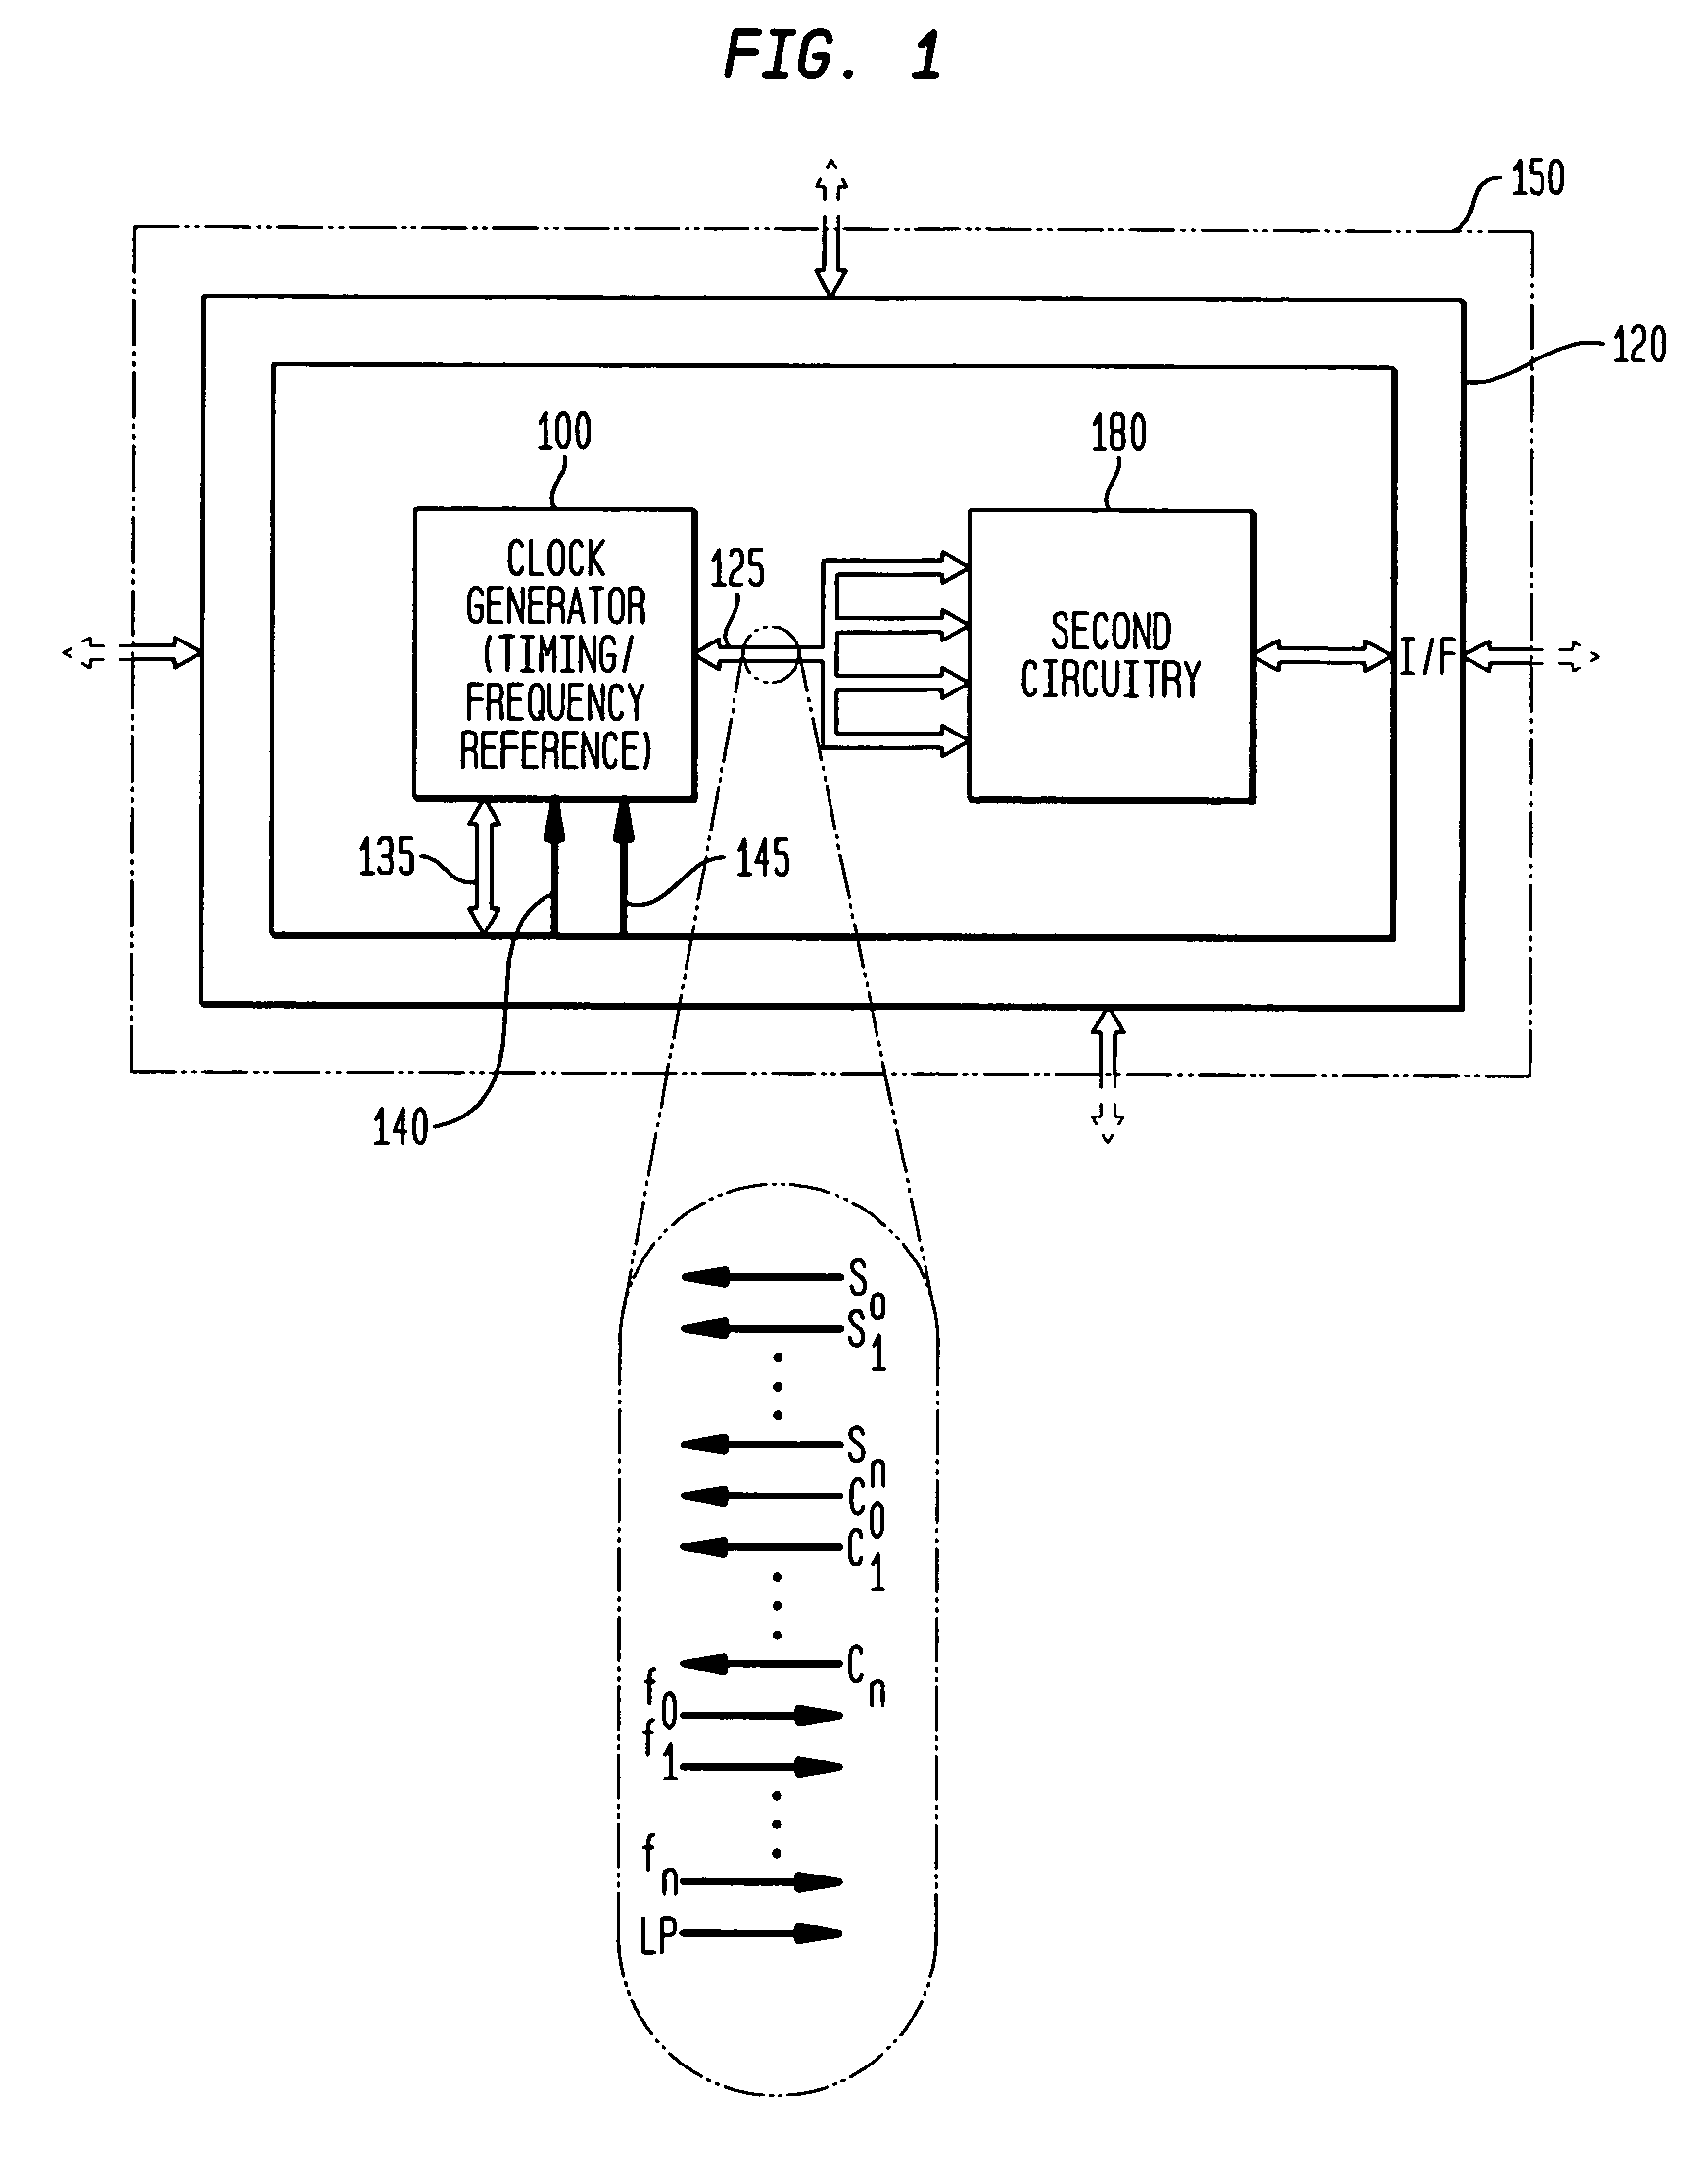 Inductor and capacitor-based clock generator and timing/frequency reference